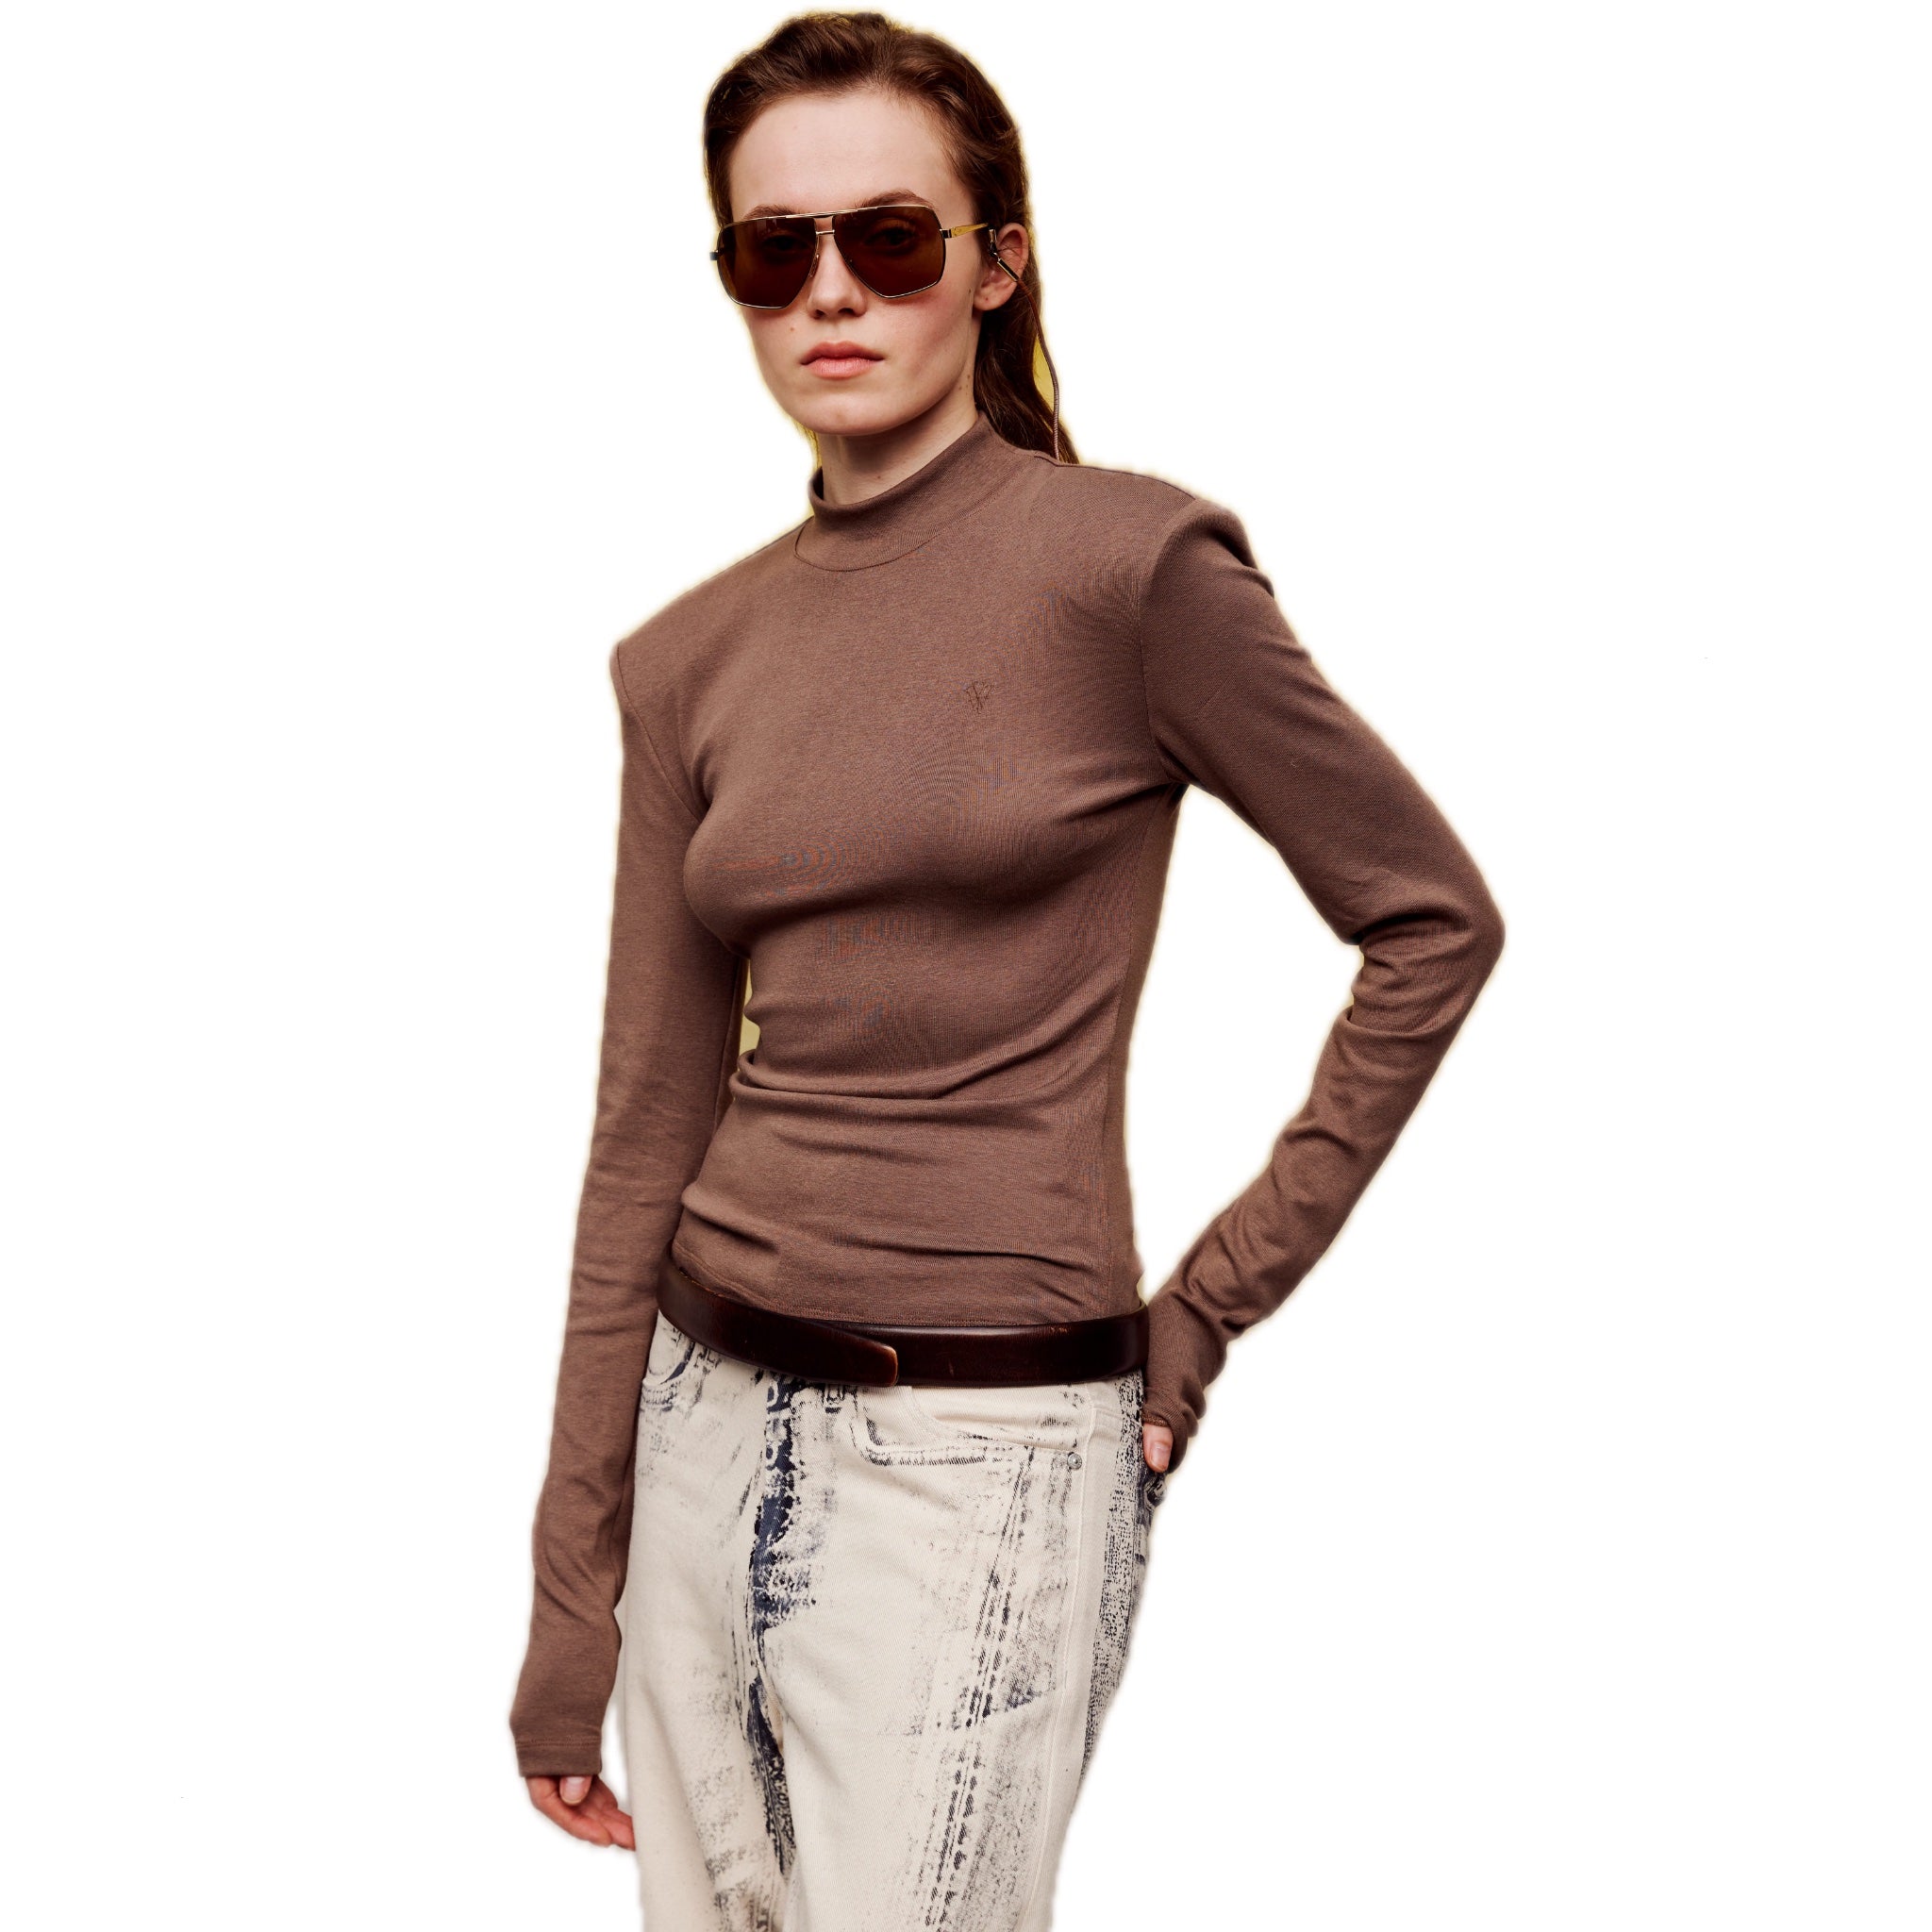 ilEWUOY DeRong Cigarette Pipe Long Sleeves in Tan | MADA IN CHINA